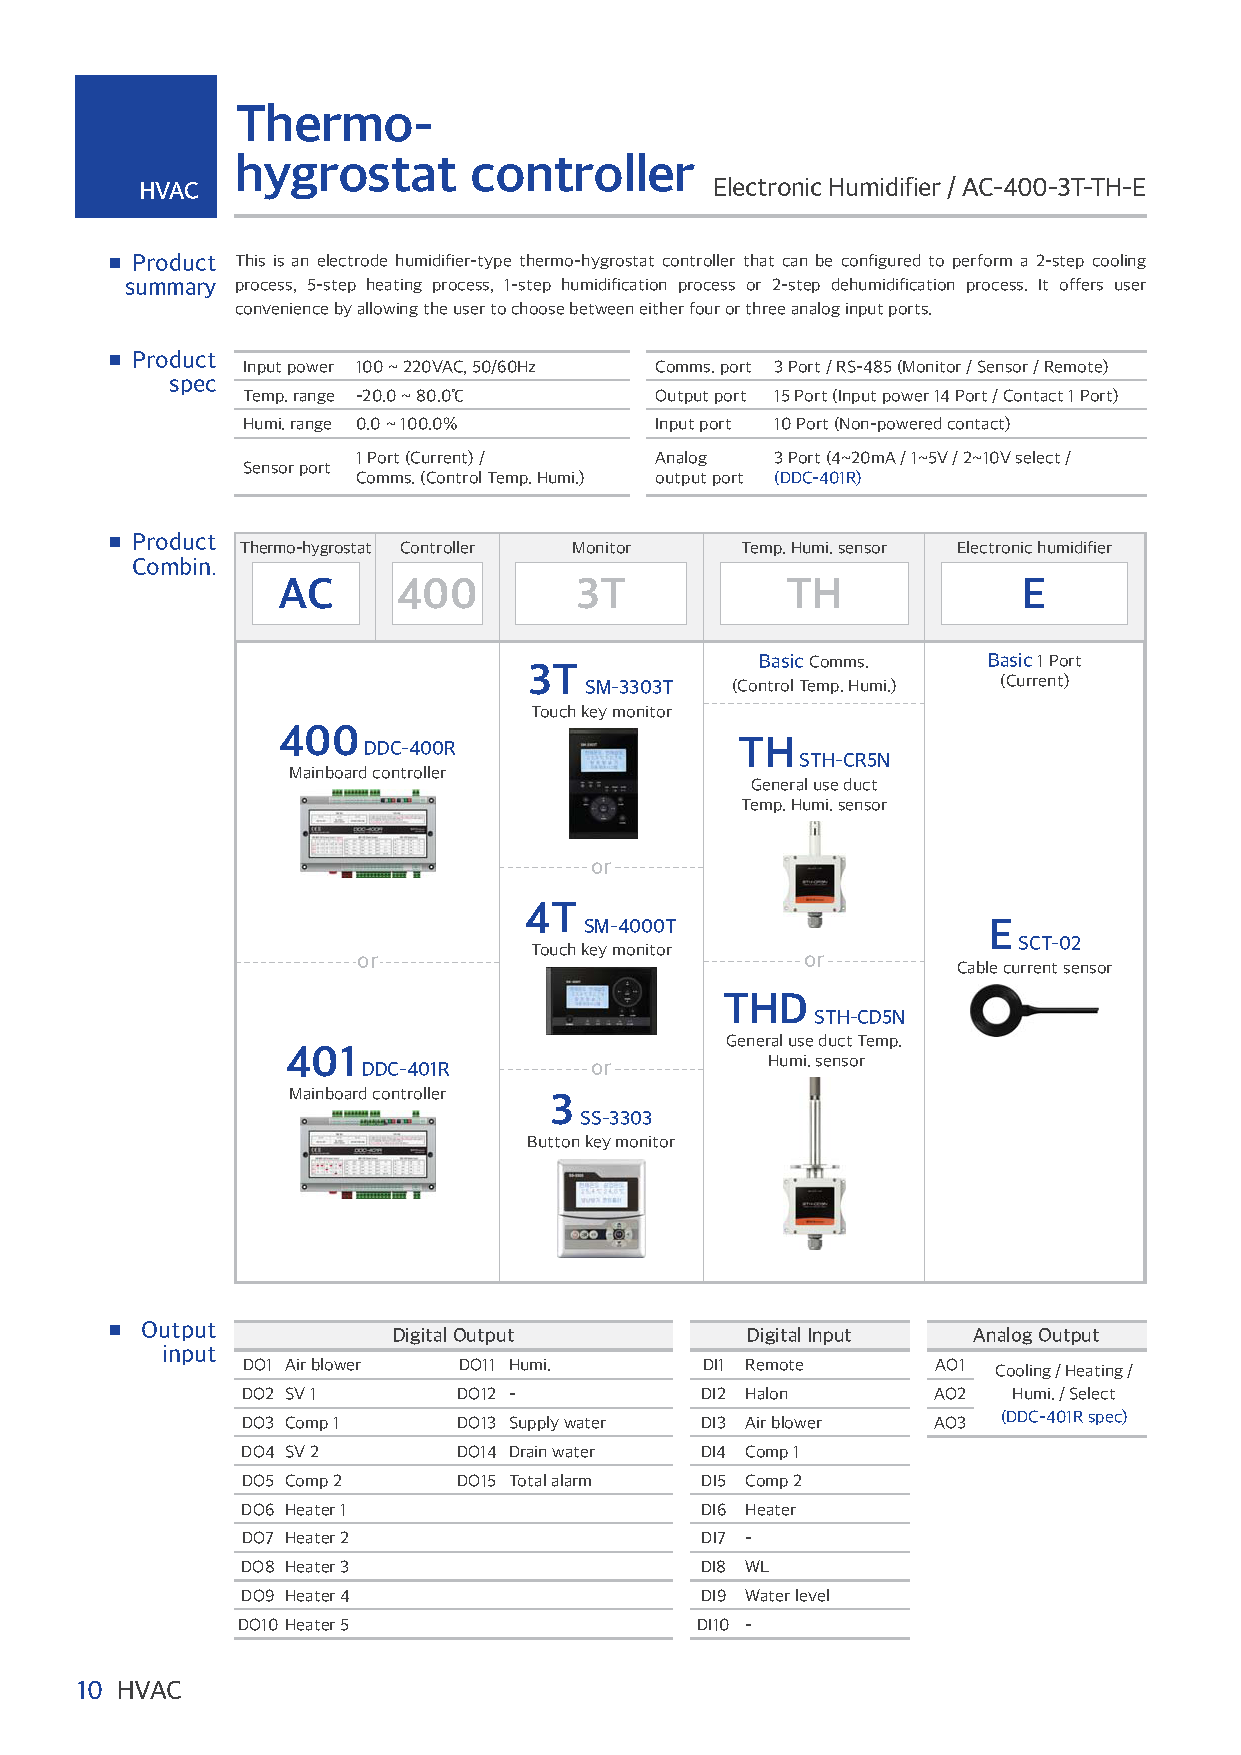 Thermo_hygrostat controller _AC_400R3T_TH_